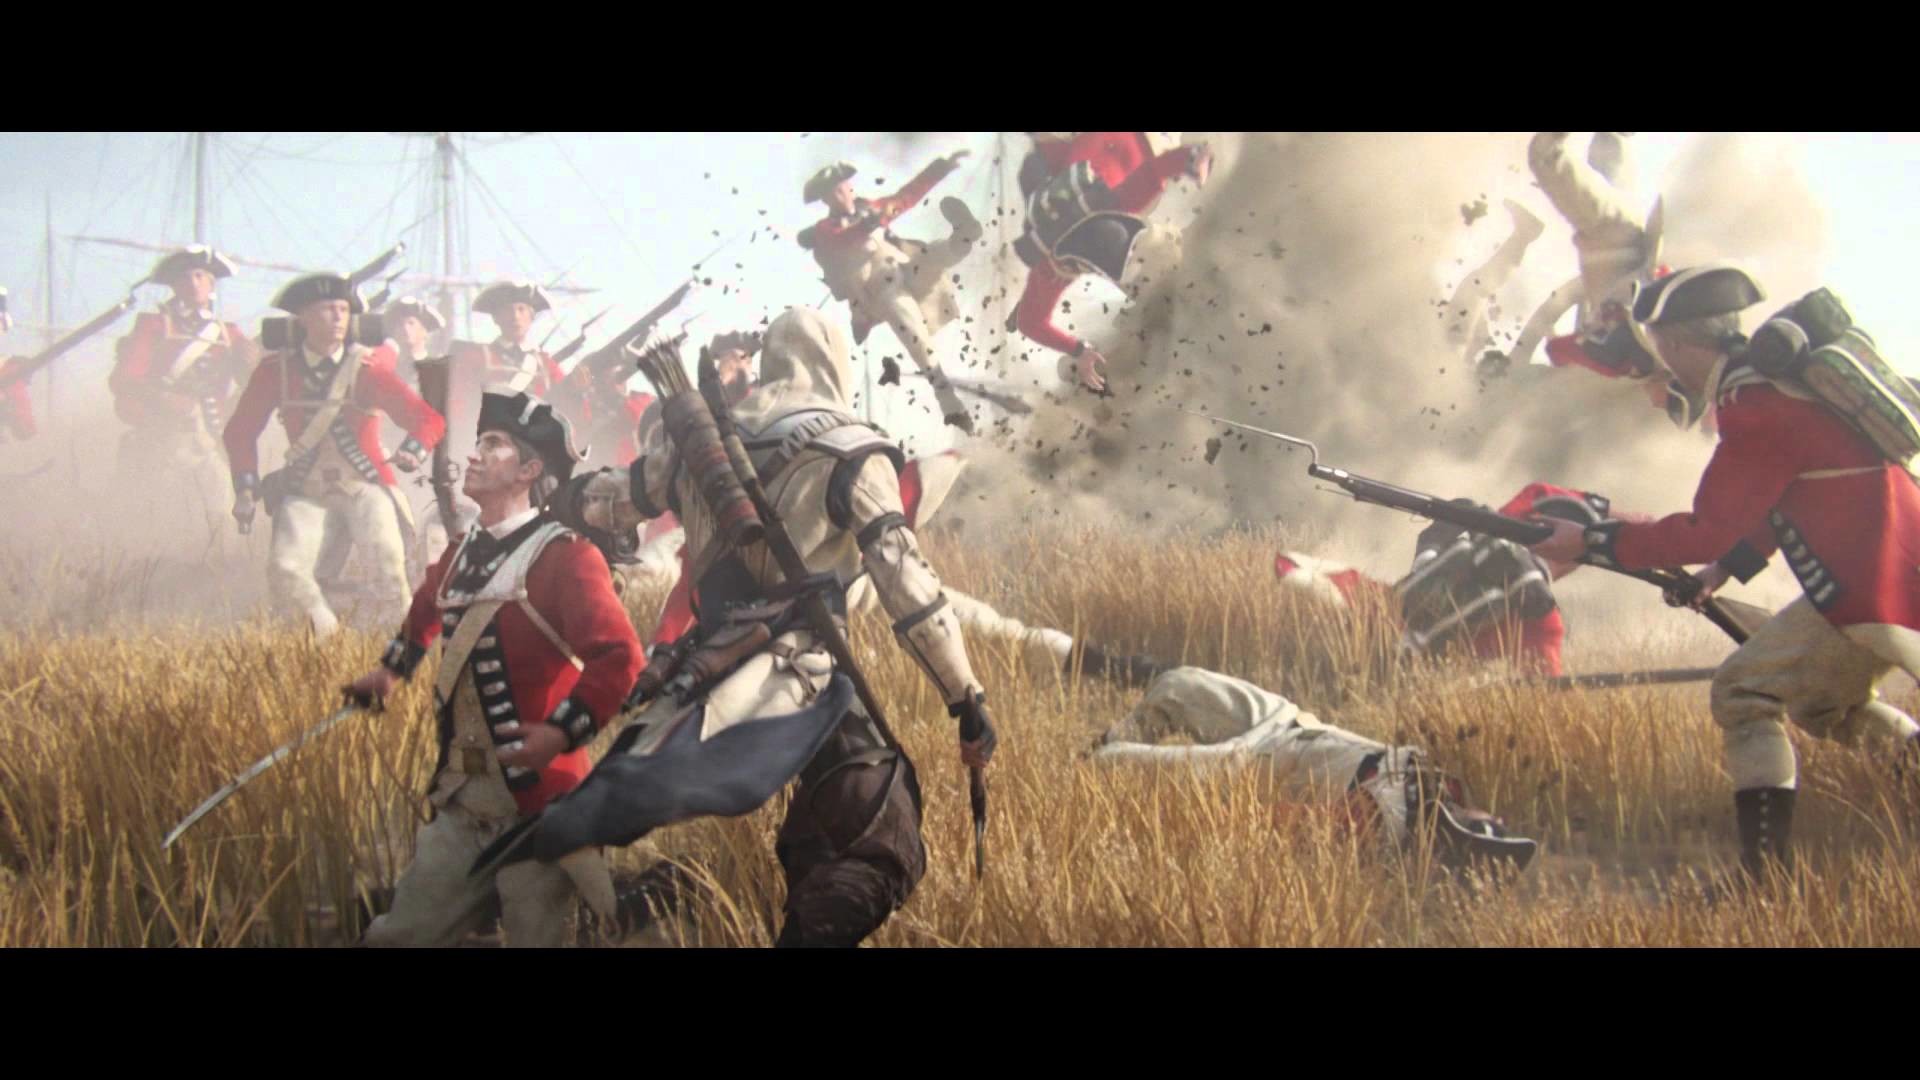 1920x1080 Assassin's Creed 3 - E3 Official Trailer [UK]